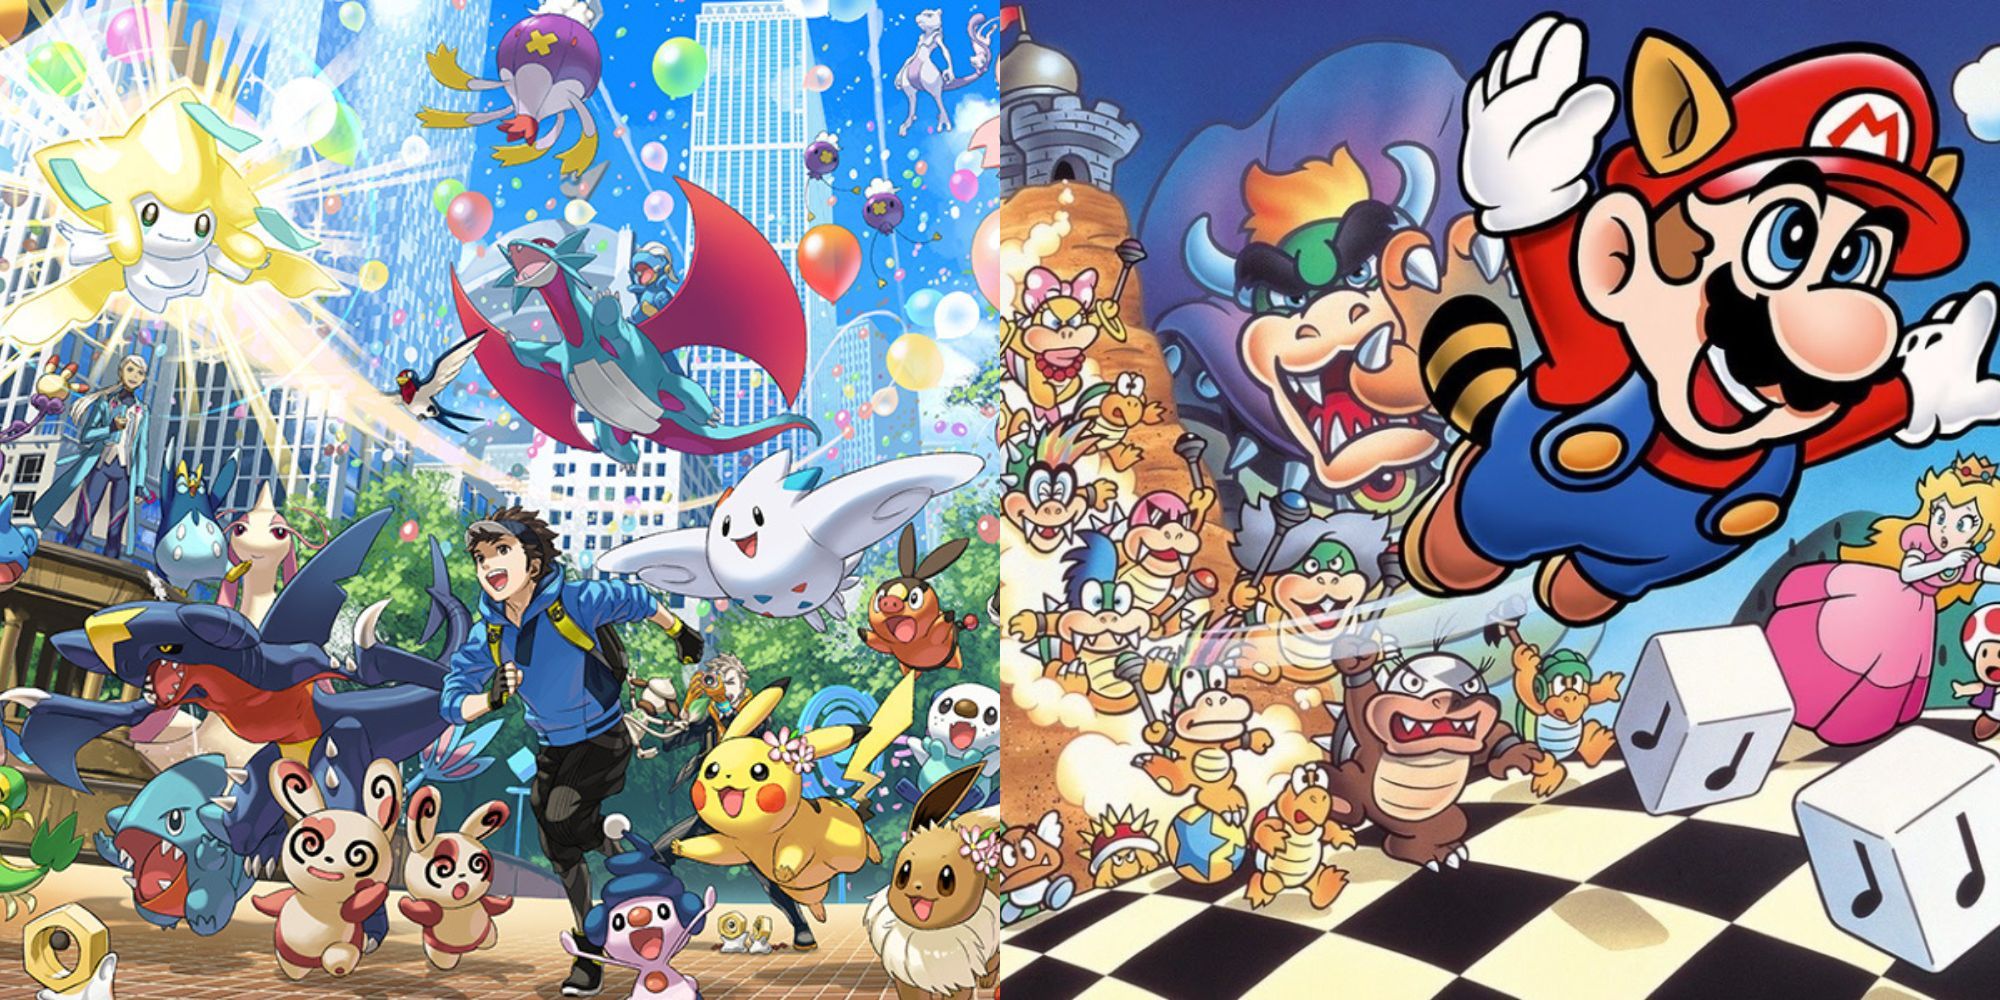 A collage of the two Nintendo franchises with the highest number of game releases: Pokemon and Mario.